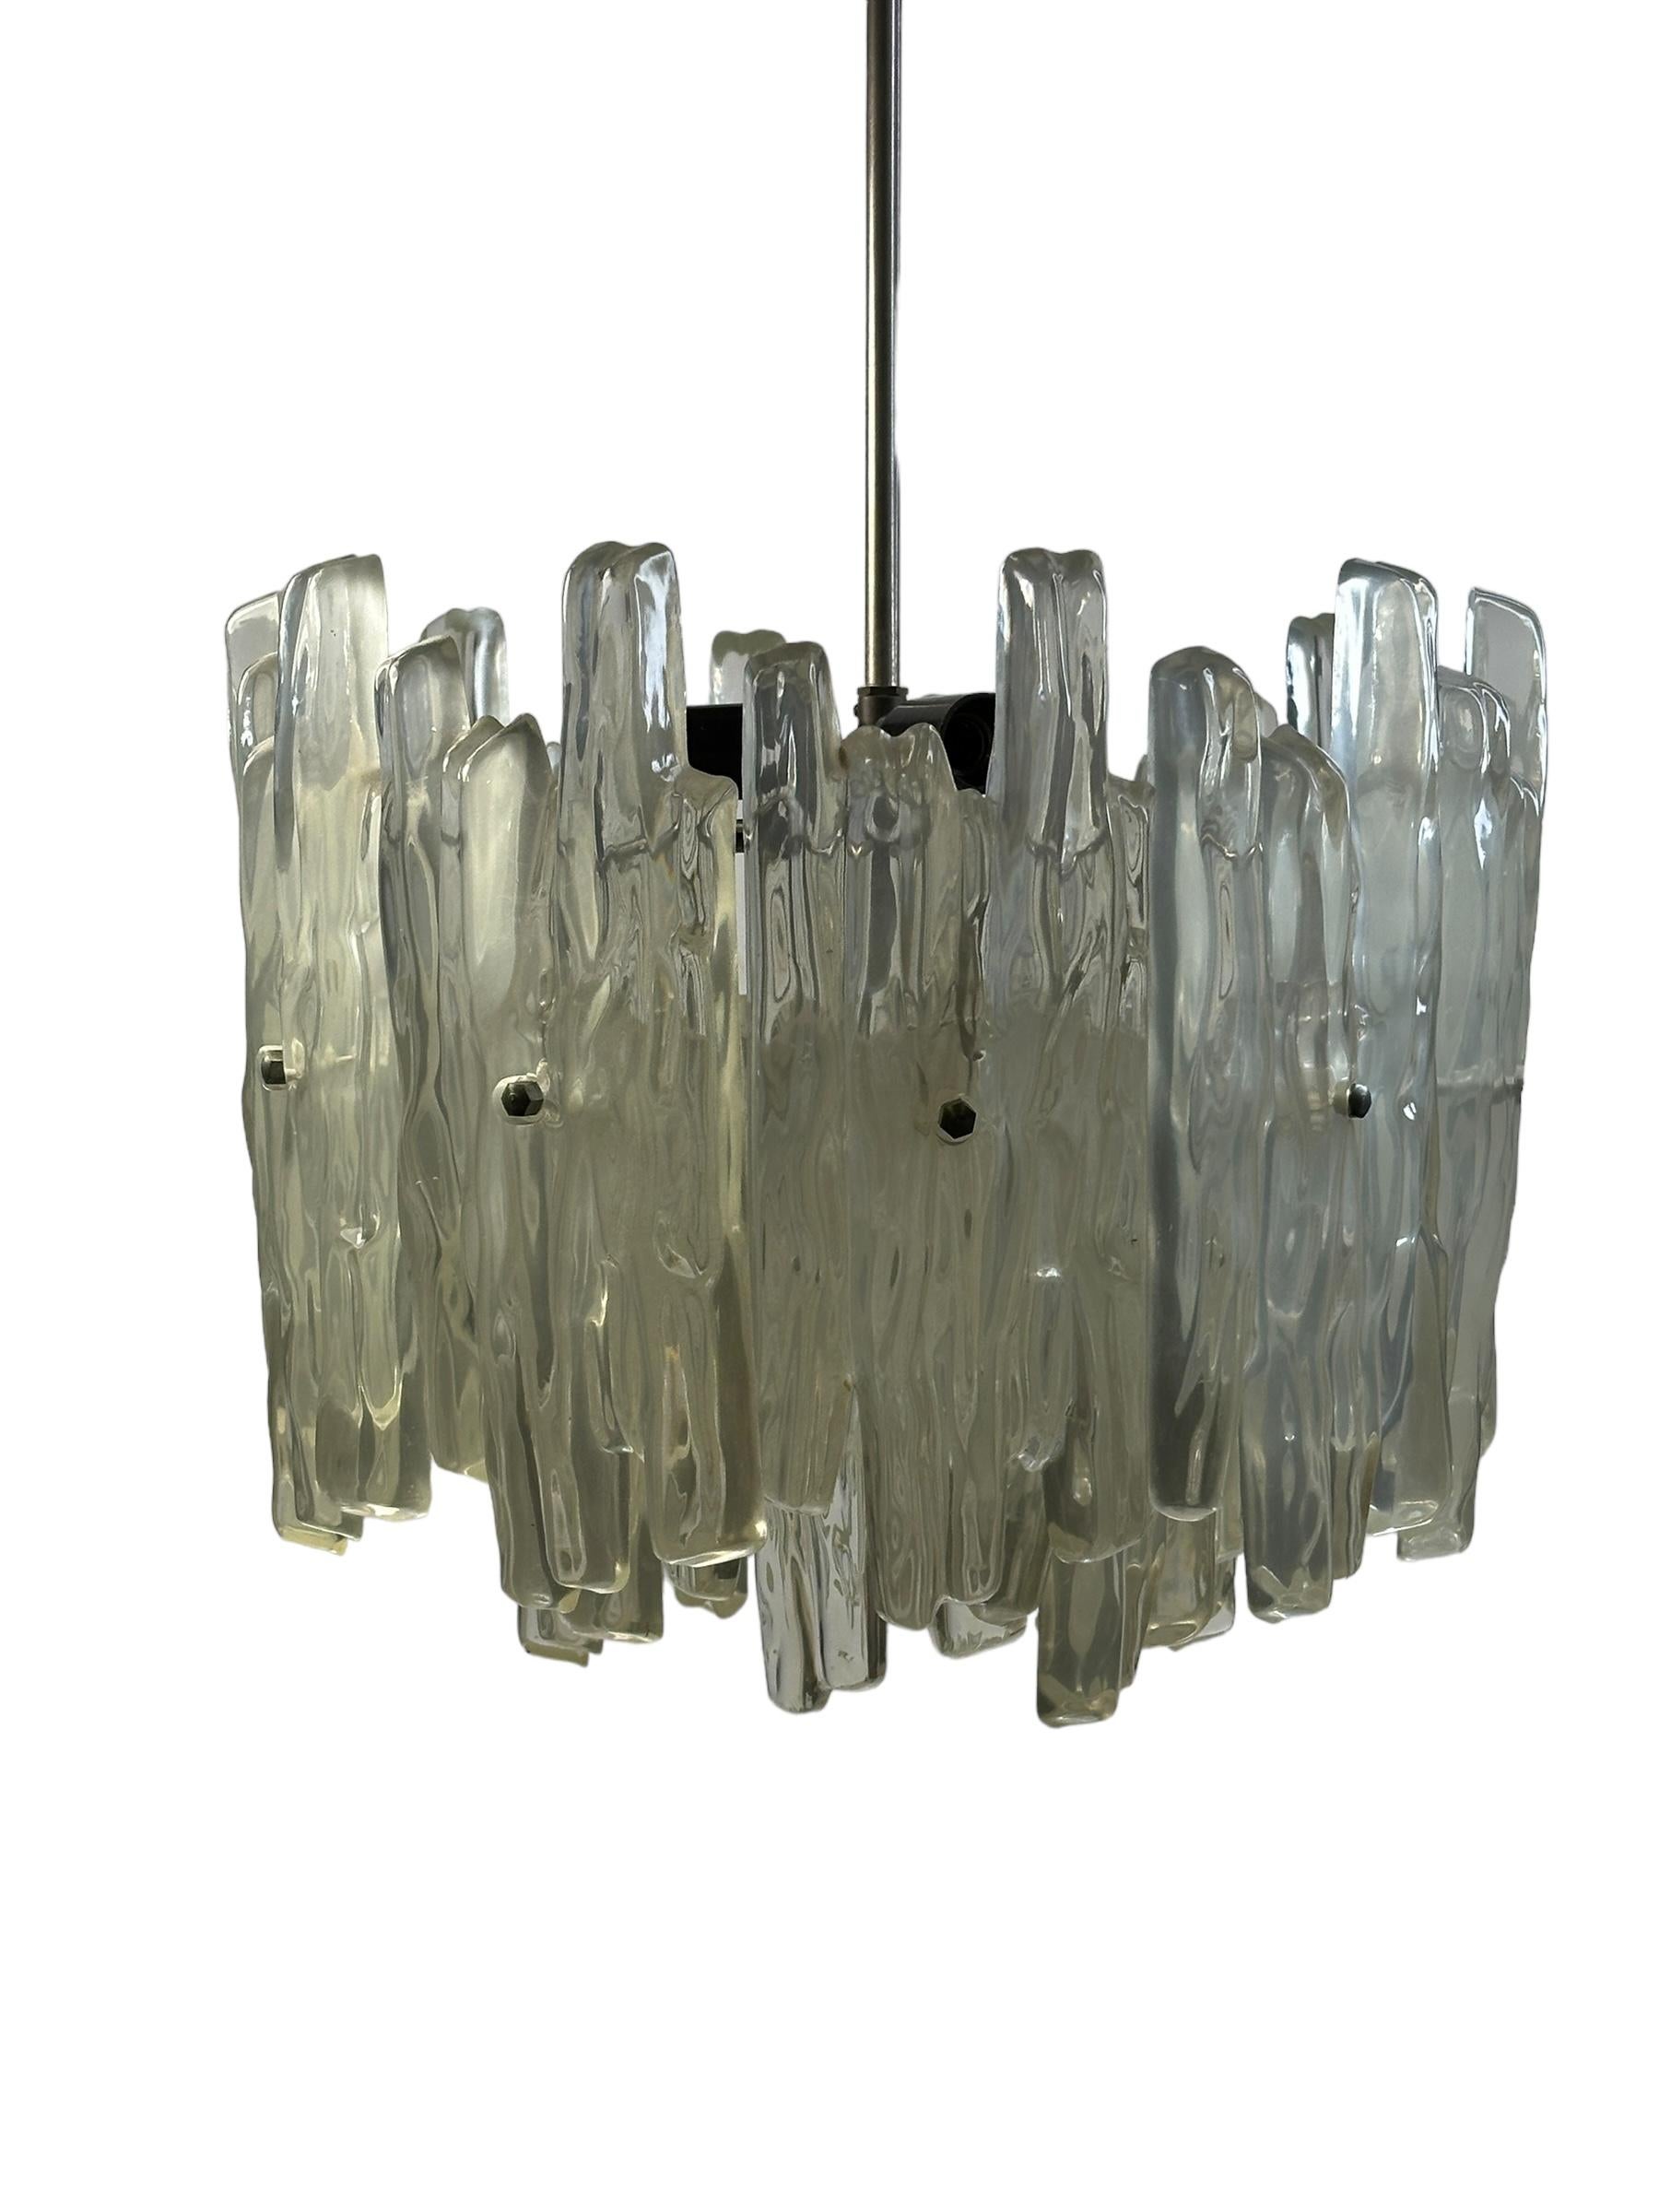 Beautiful and rare chandelier or pendant light by Kalmar Leuchten, Austria. An original mid-century vintage piece manufactured in the 1960s. It is made of aluminum , metal and Lucite glass. The Fixture requires one European E27 / 110 Volt Edison